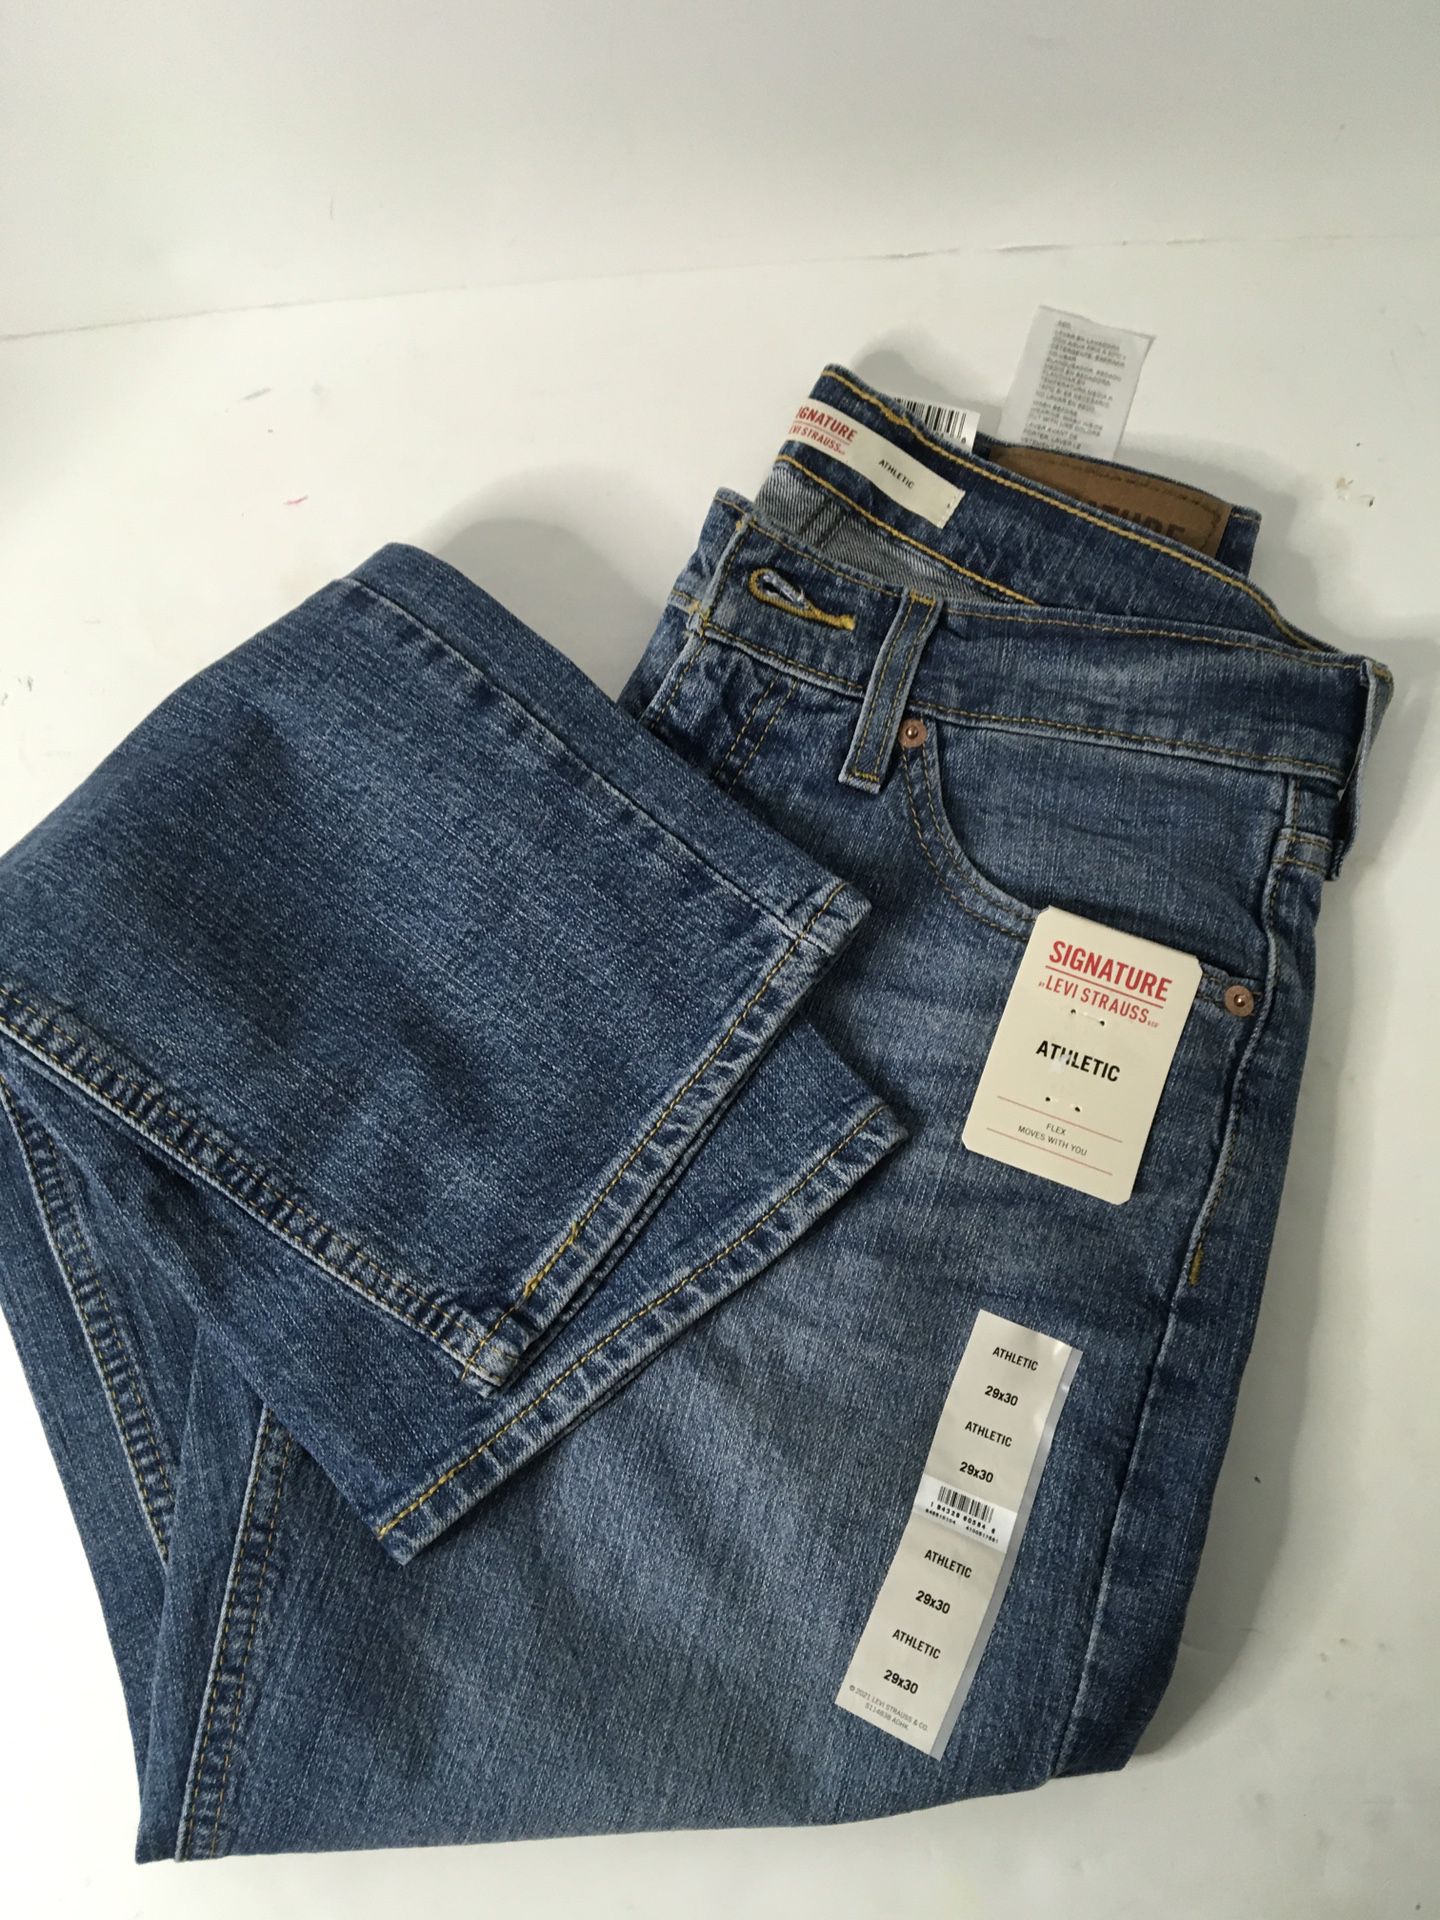 New Men's Size 29x30 Signature Levi Strauss Athletic Flex Fit Jeans for  Sale in La Marque, TX - OfferUp